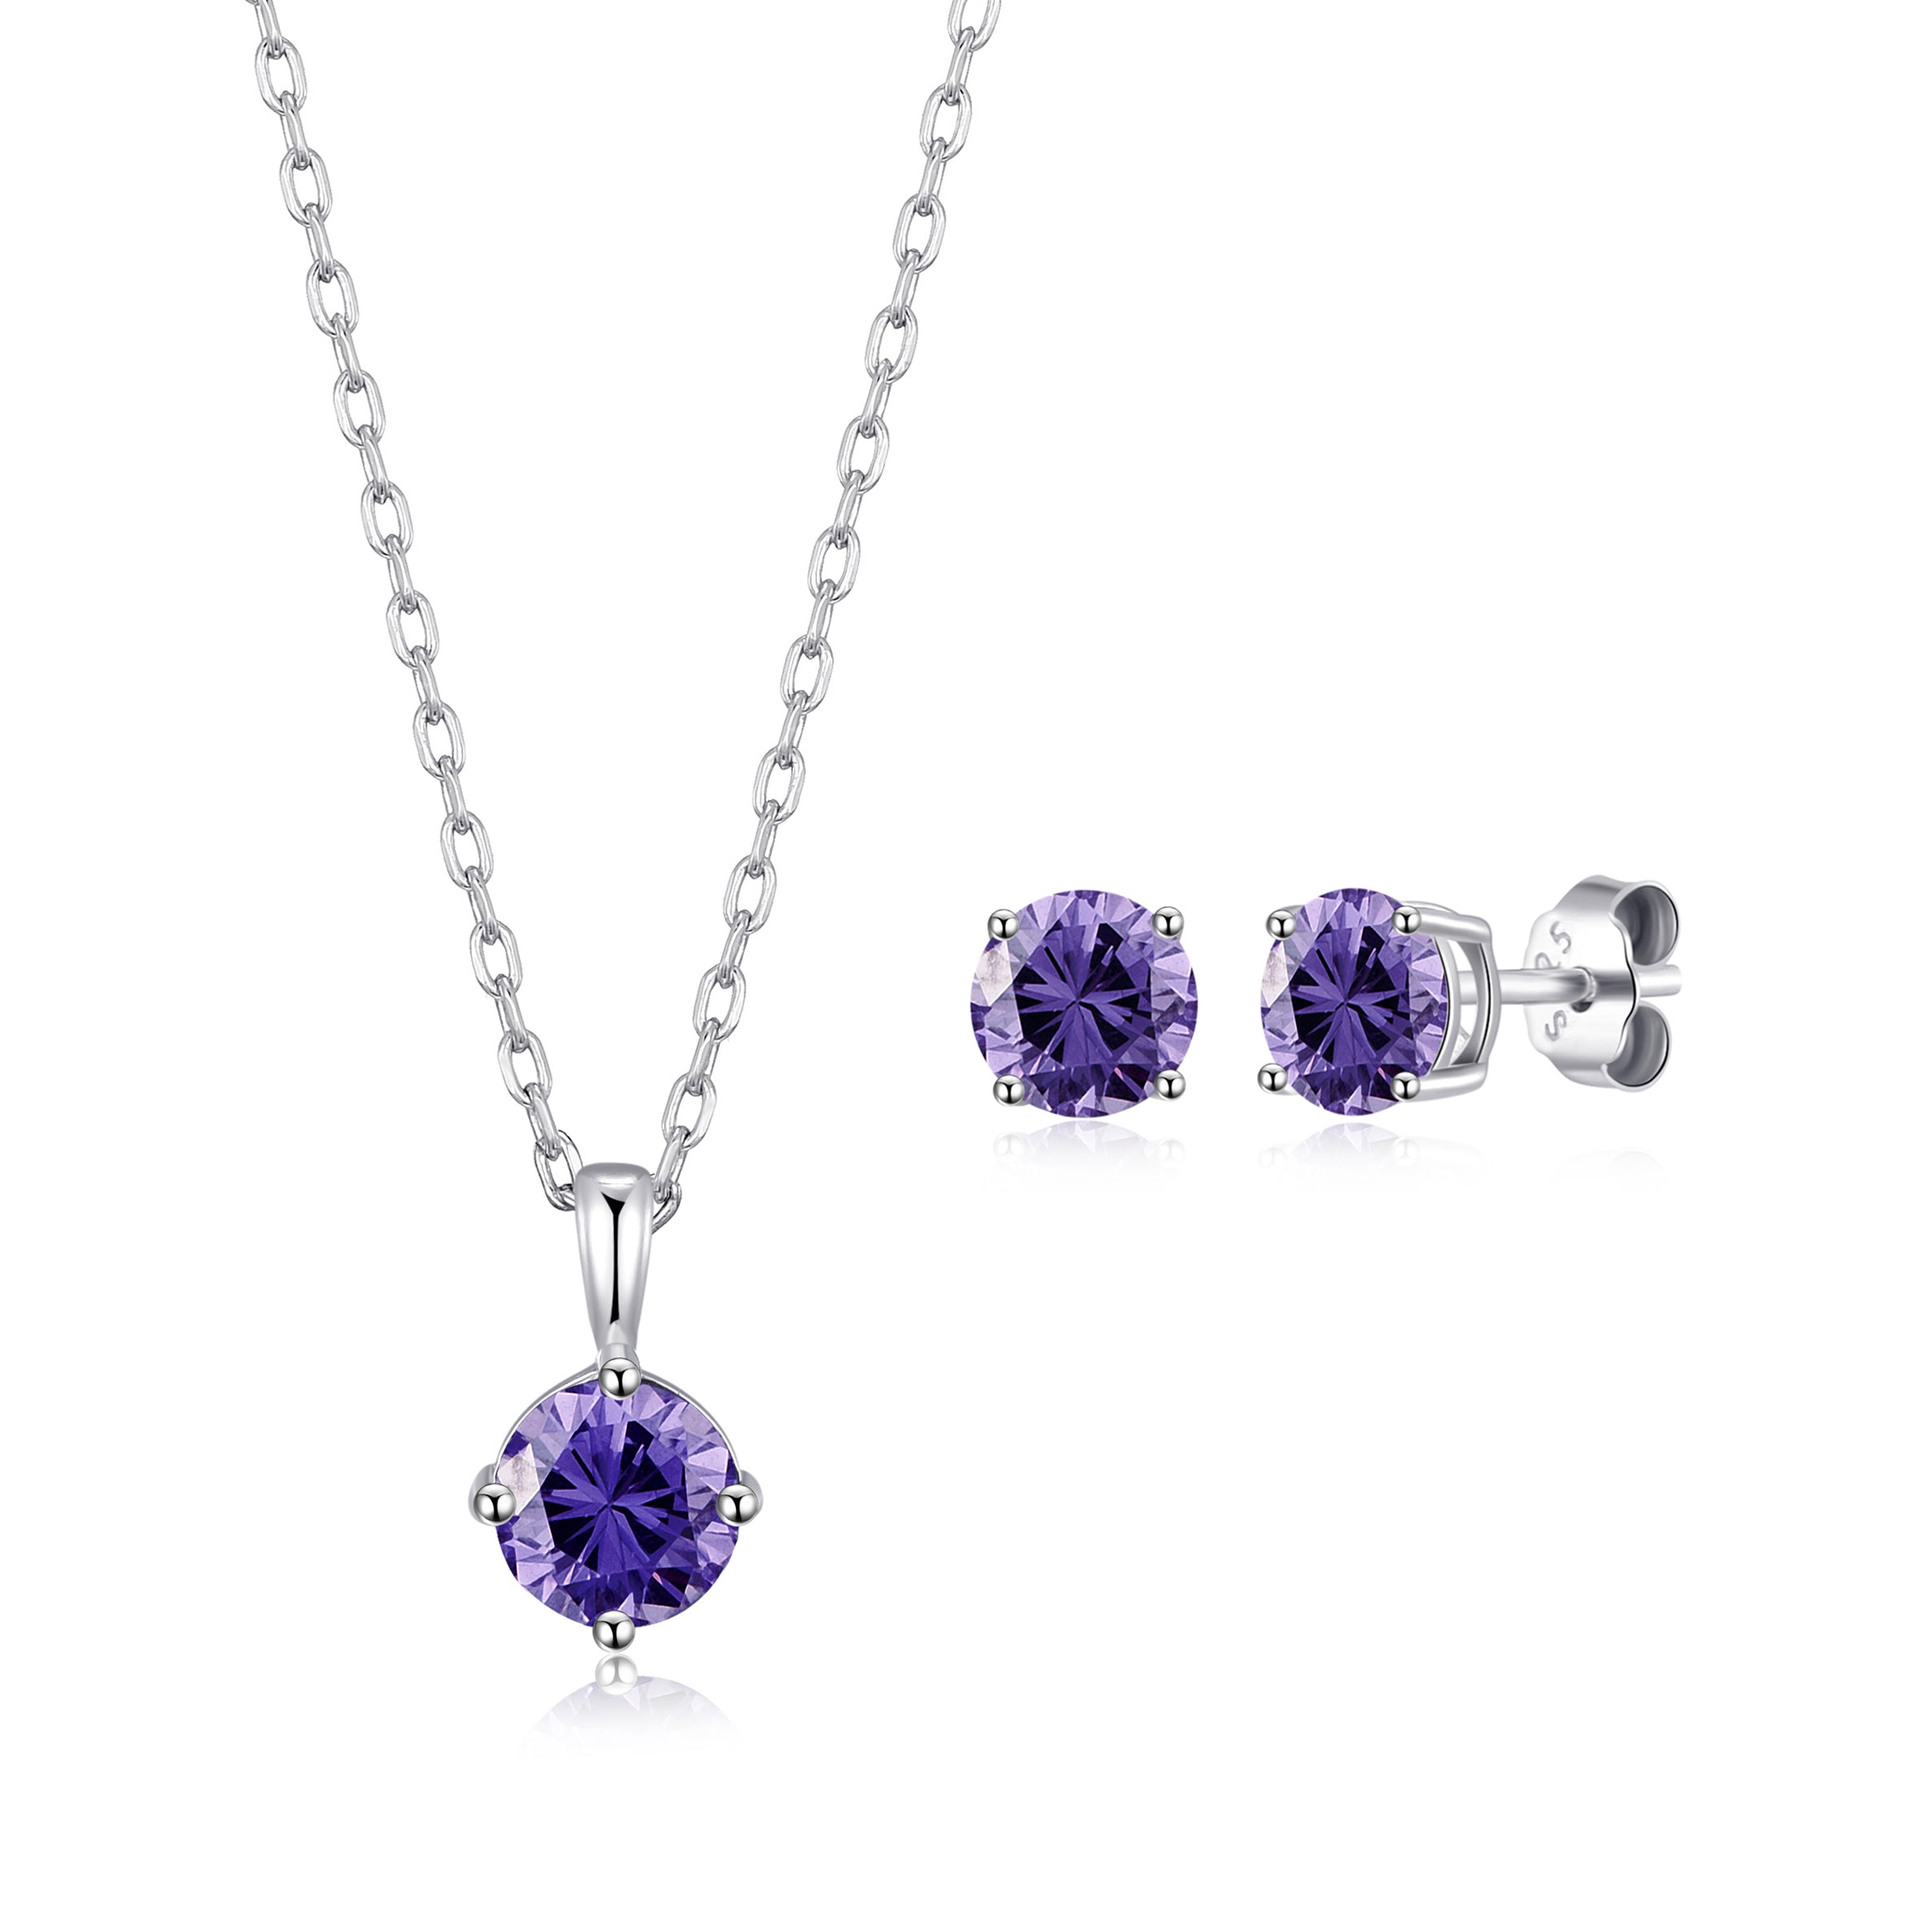 Sterling Silver February (Amethyst) Birthstone Necklace & Earrings Set Created with Zircondia® Crystals by Philip Jones Jewellery